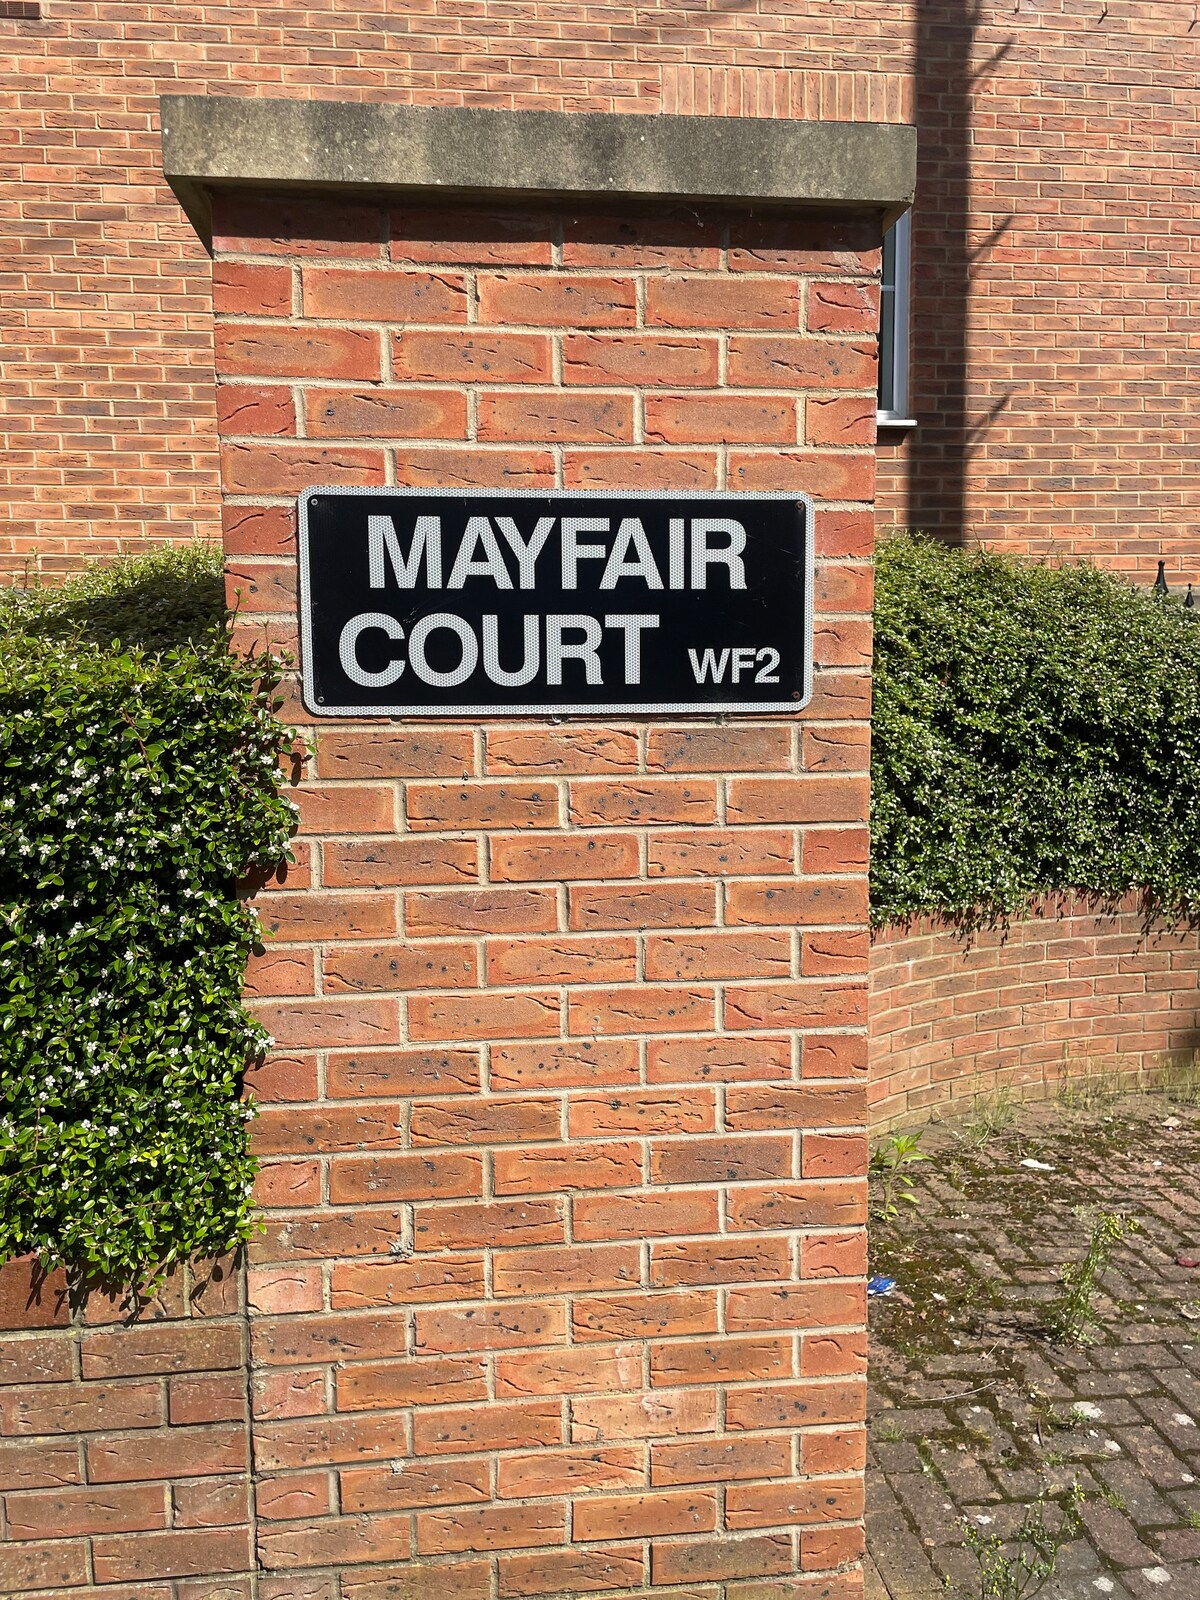 Mayfair Staycation Court